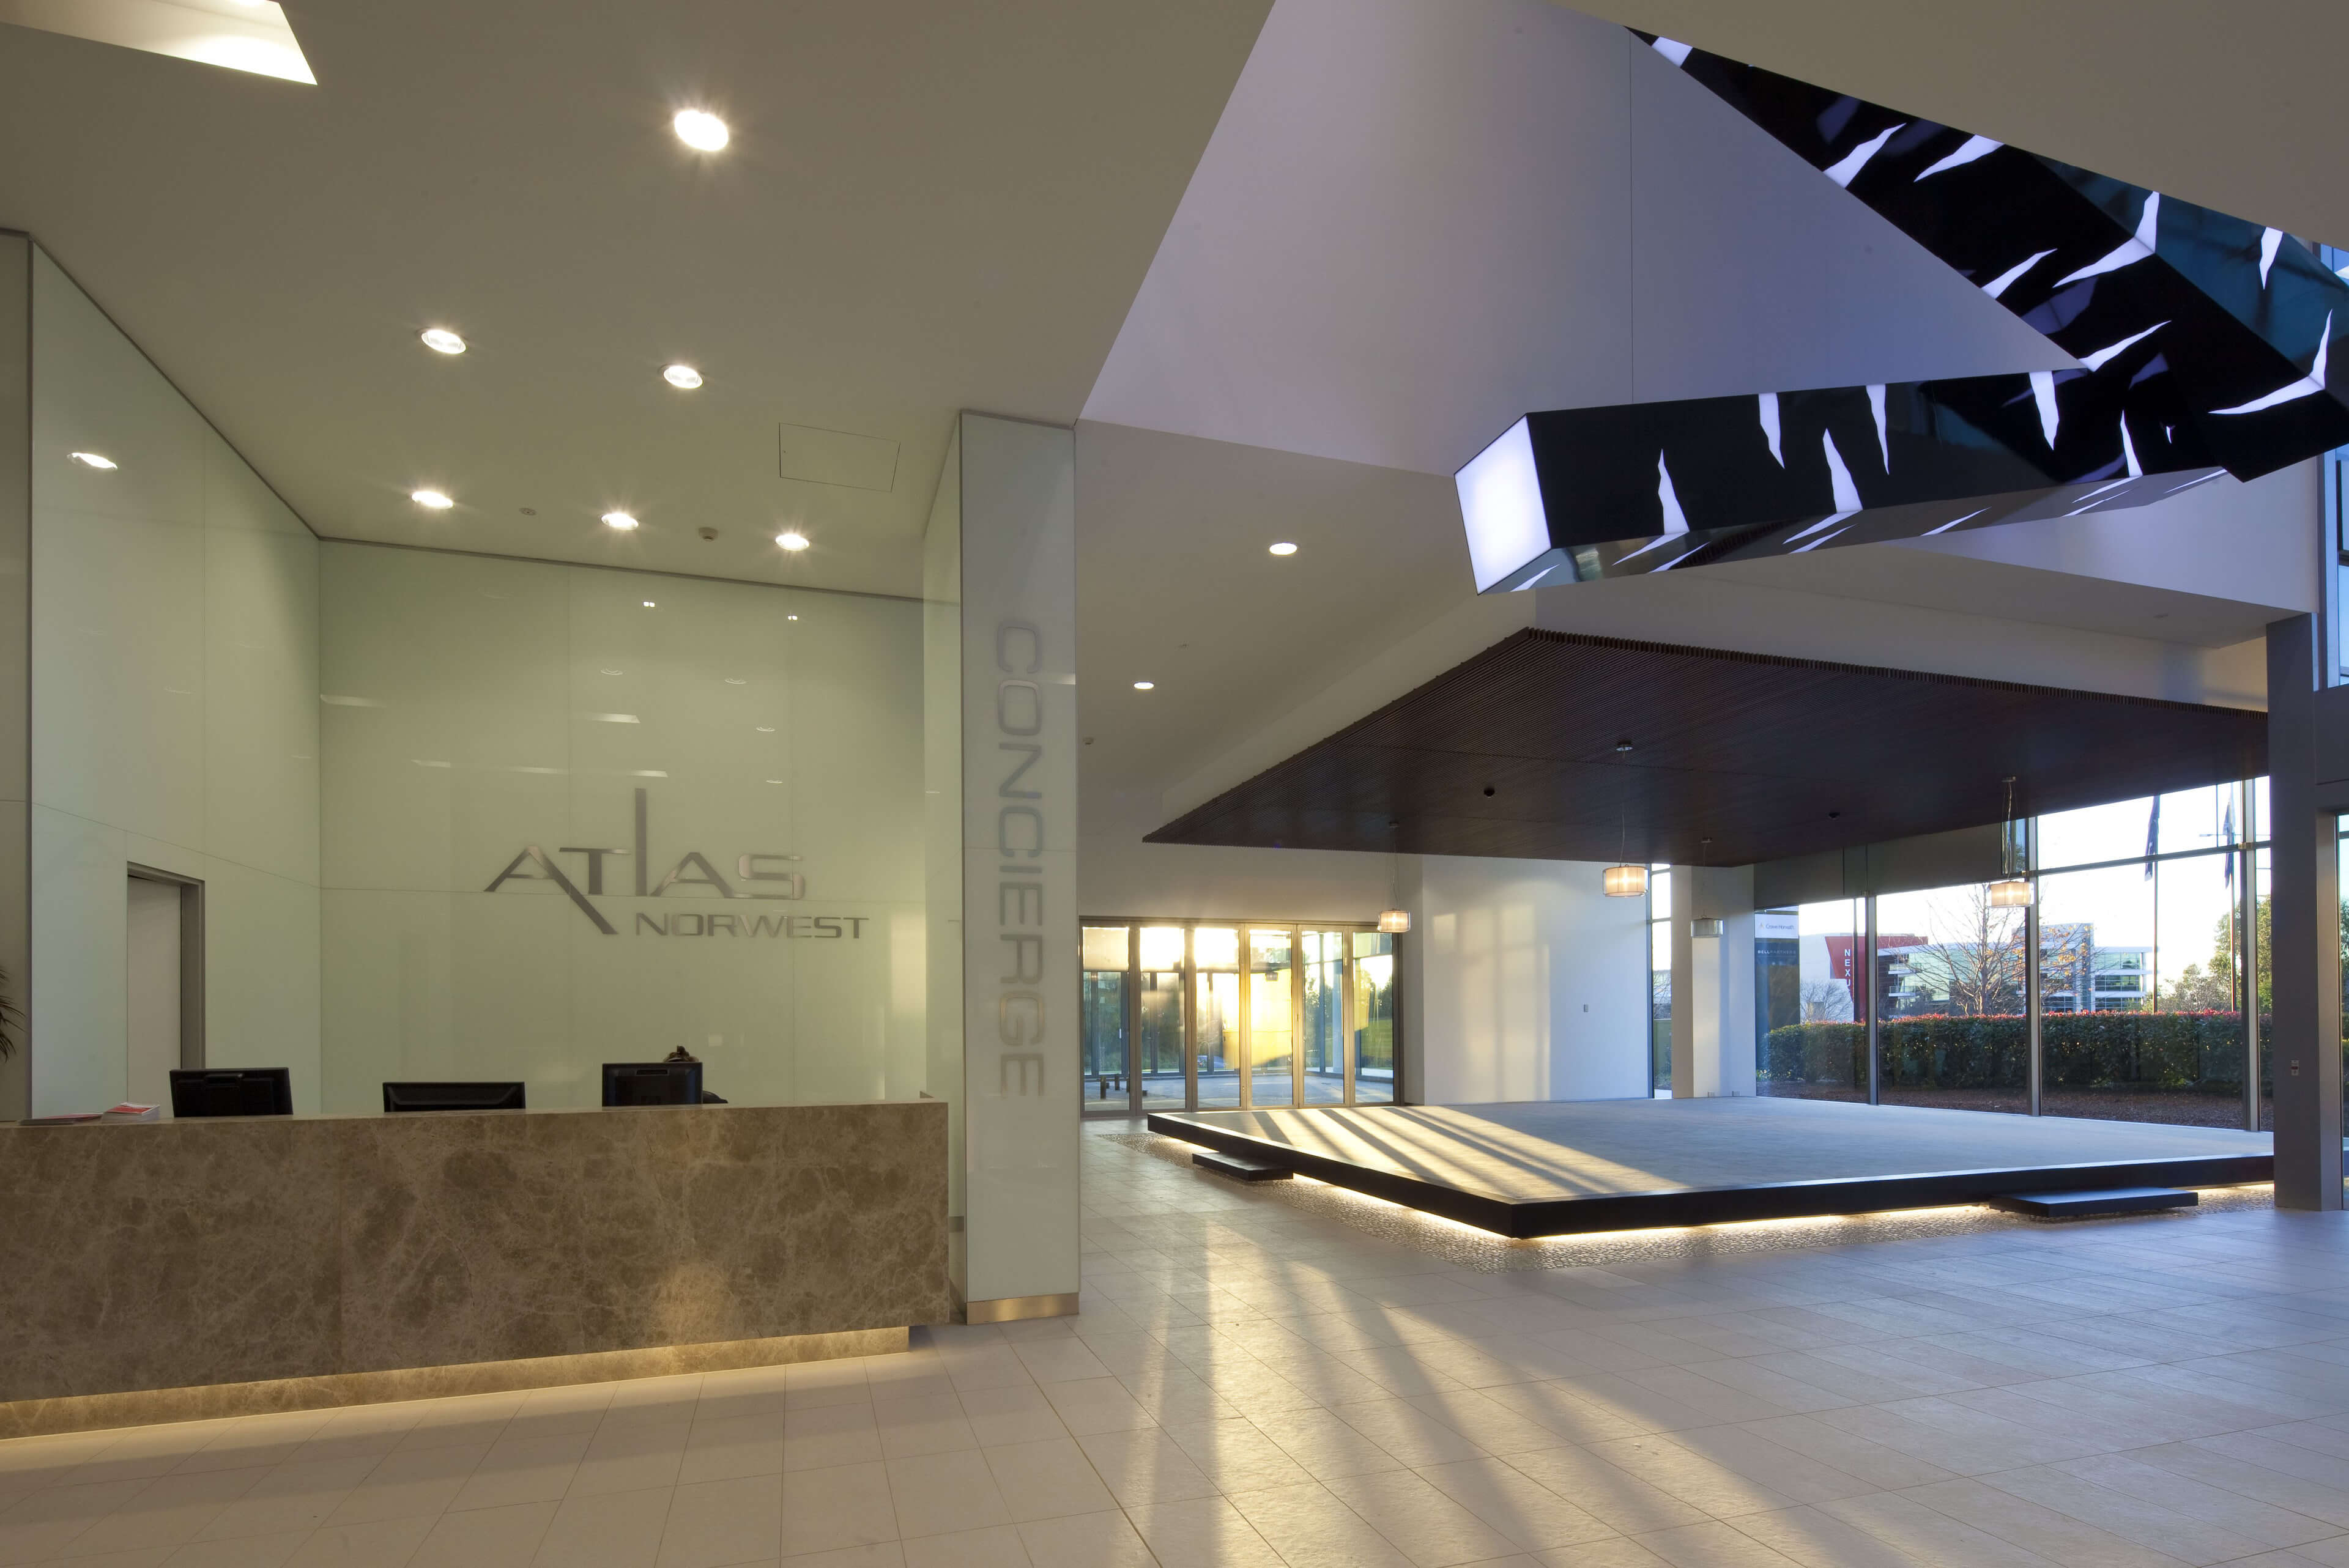 6 interior lobby atlas norwest taylor construction commercial